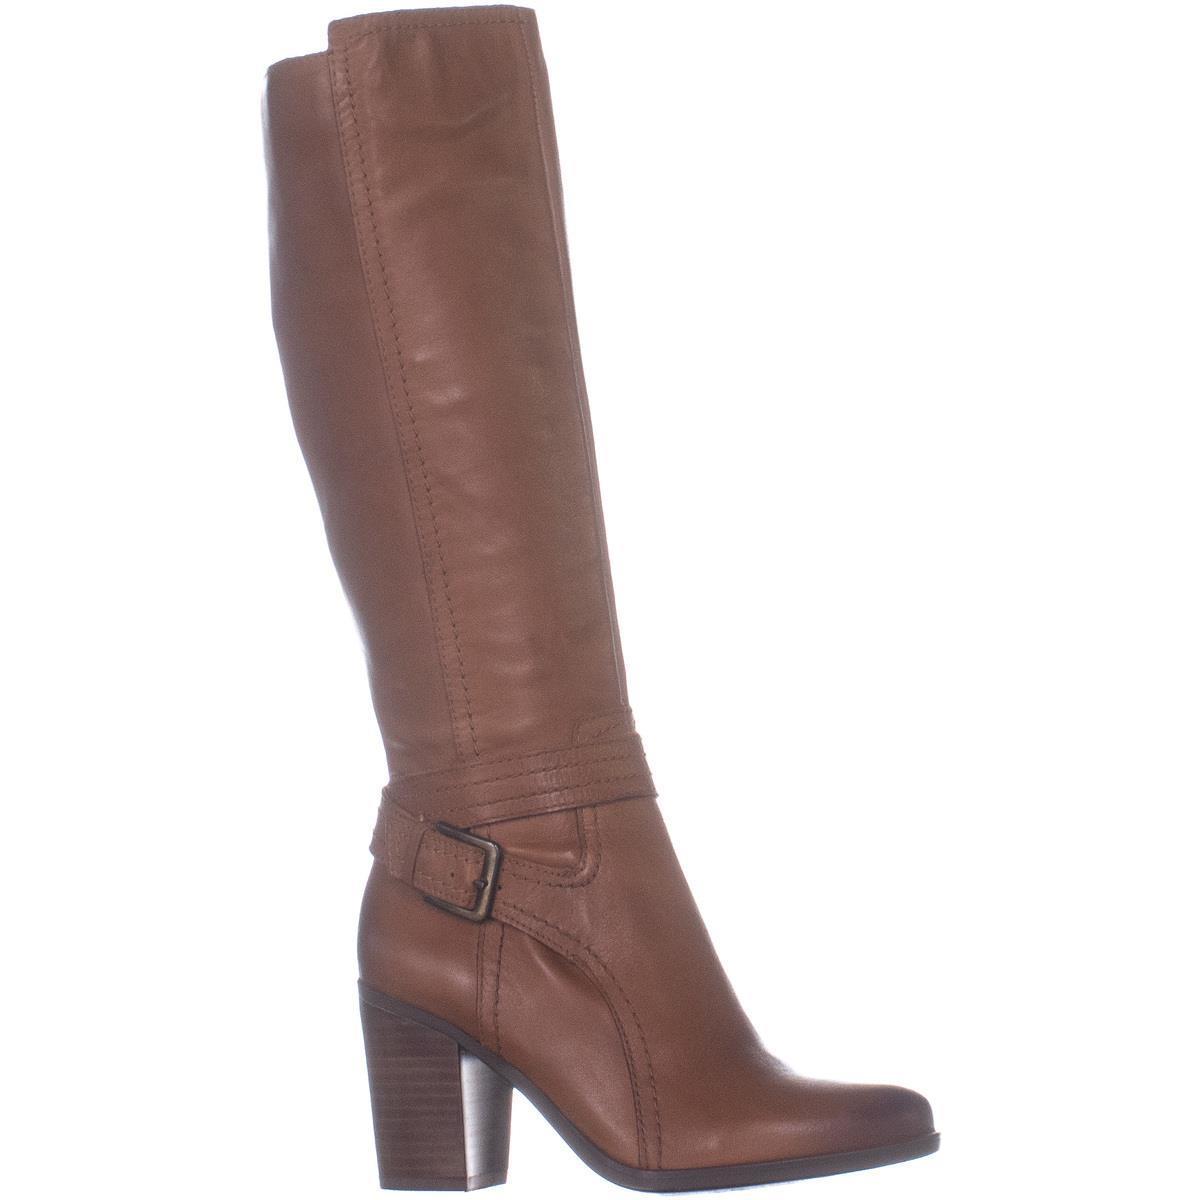 naturalizer Kelsey Knee High Boots 536, Light Mmaple Leather, 5.5 US ...